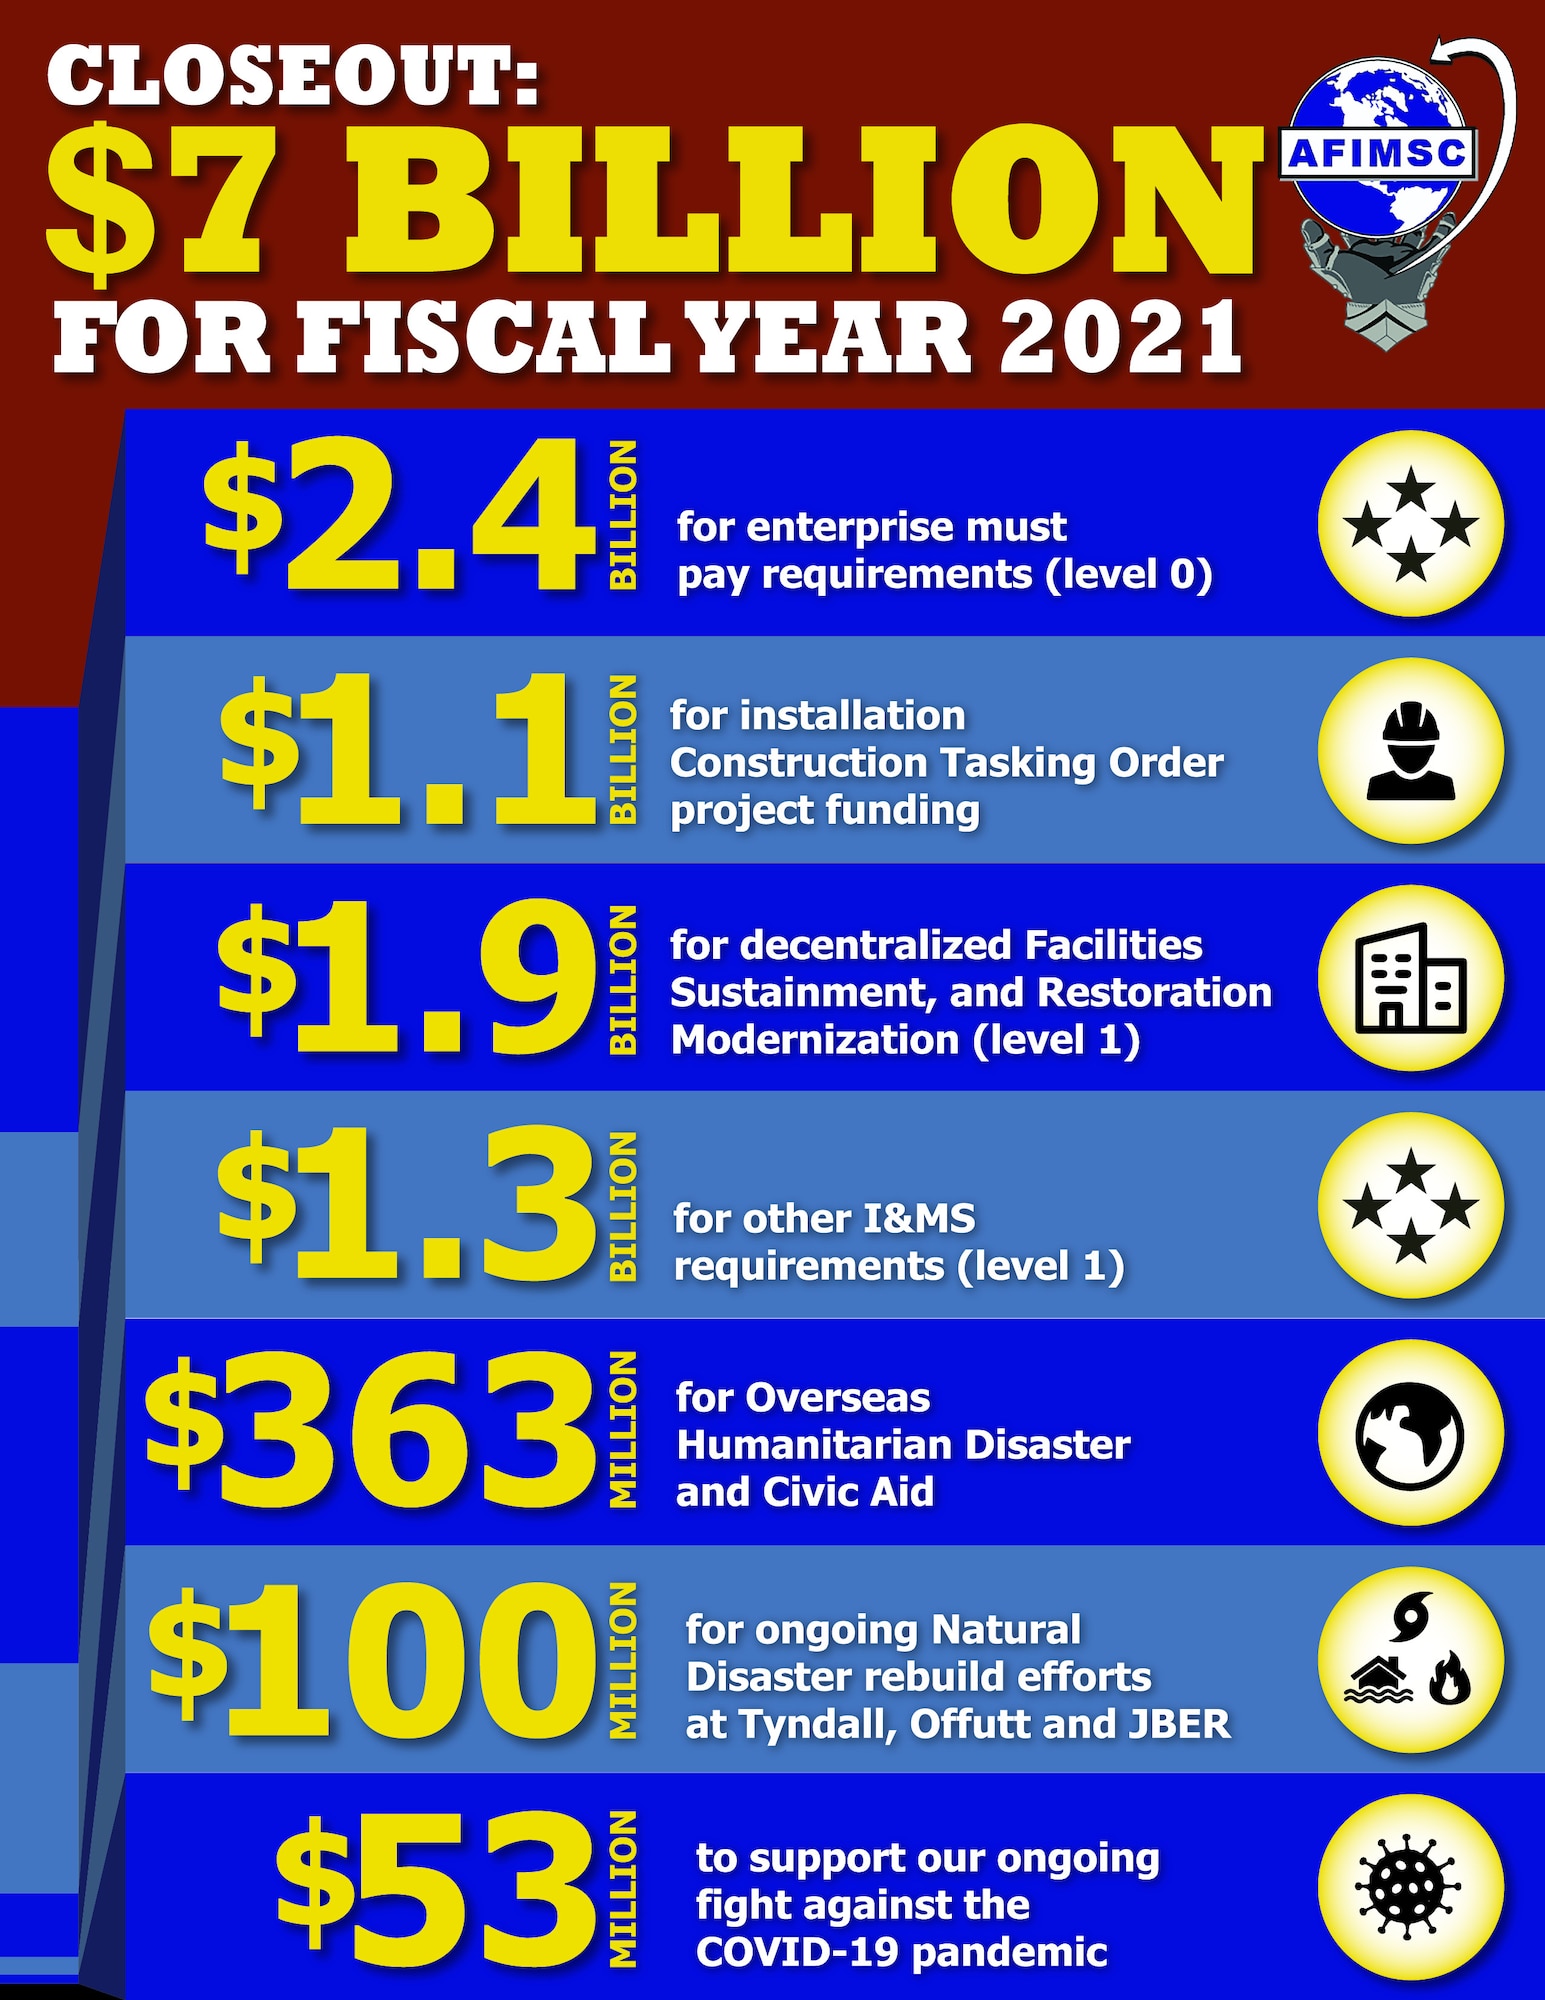 The Air Force Installation and Mission Support Center closed out an extremely tight year in the last hours of FY21, executing more than $7 billion to attain close to 99.9 percent obligation of the operations and maintenance portfolio across the enterprise.